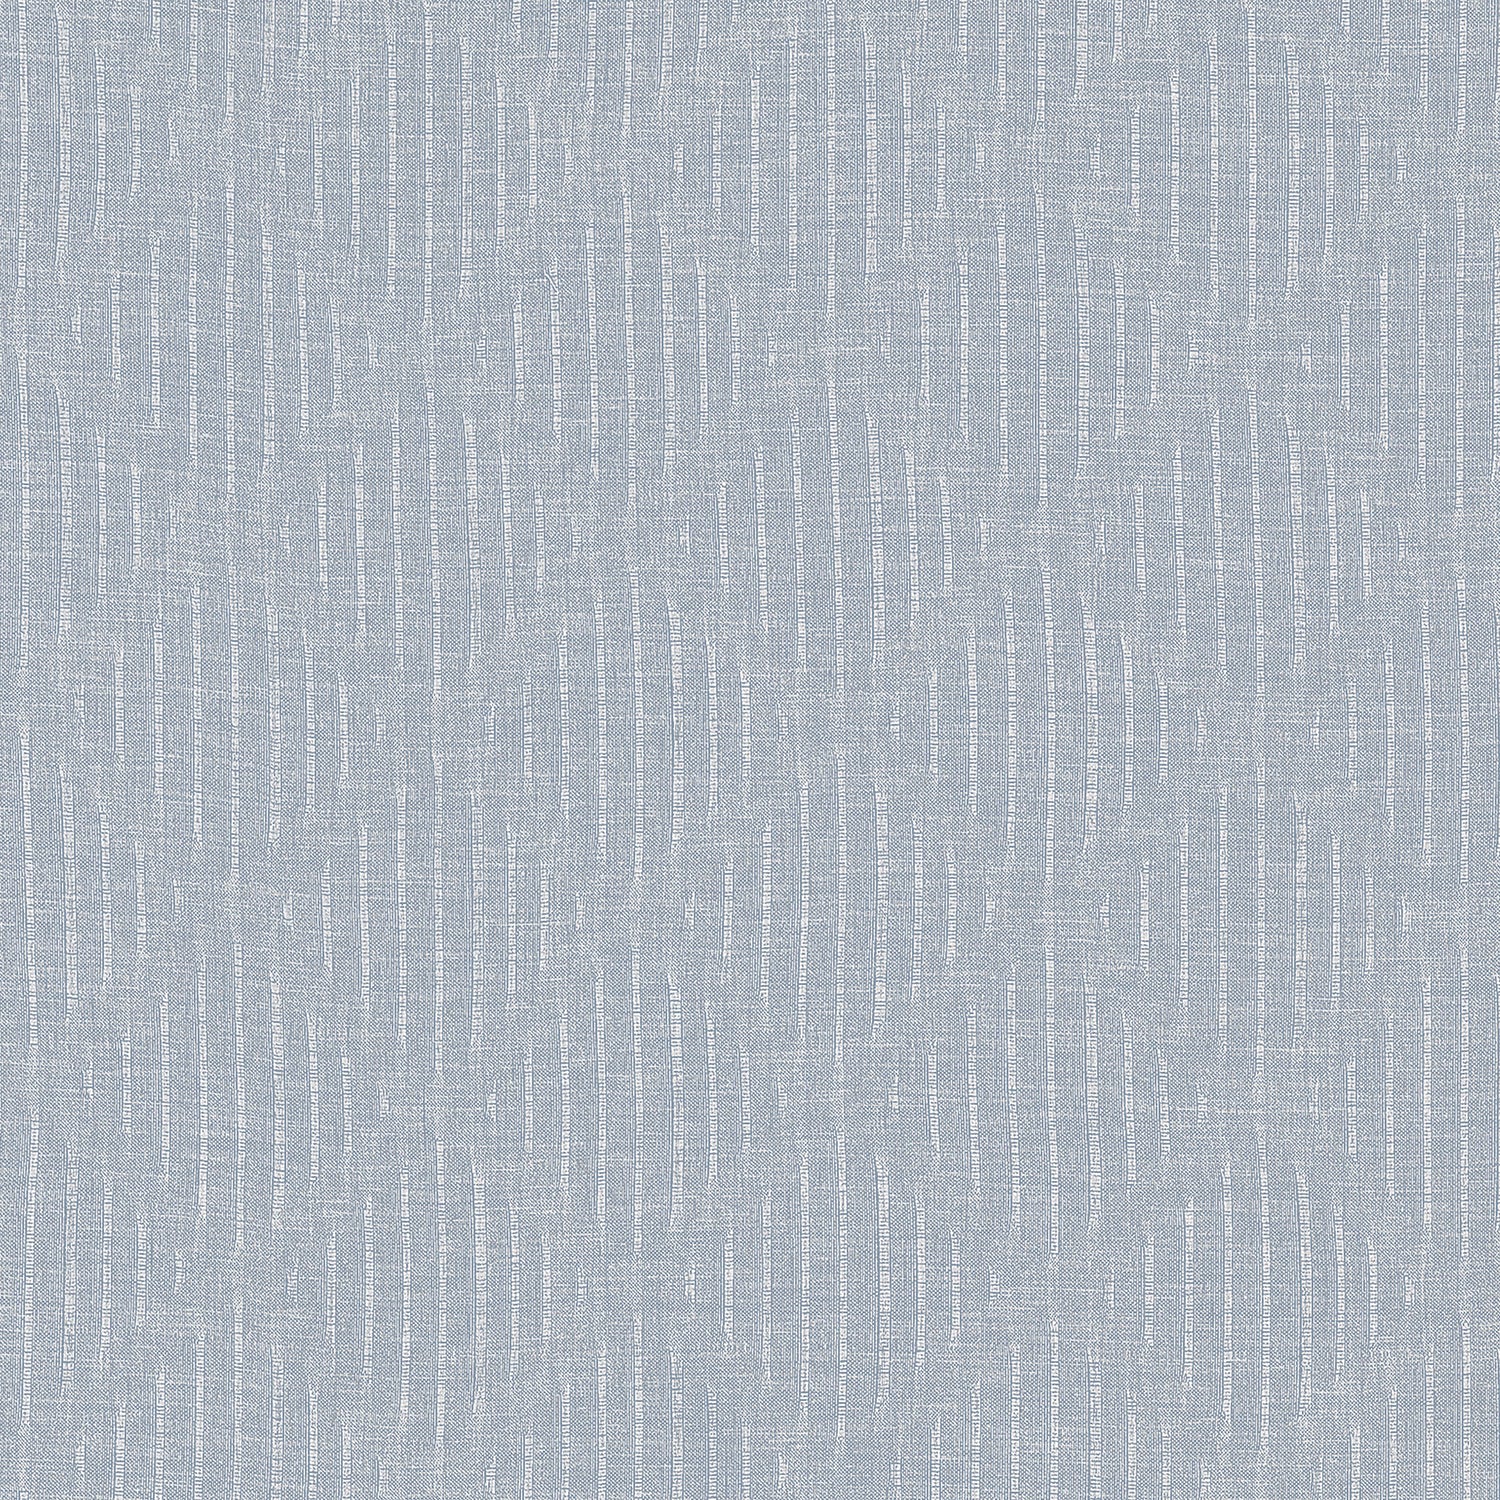 Dunlin fabric in slate color - pattern number FWW81773 - by Thibaut in the Locale Wide Width collection